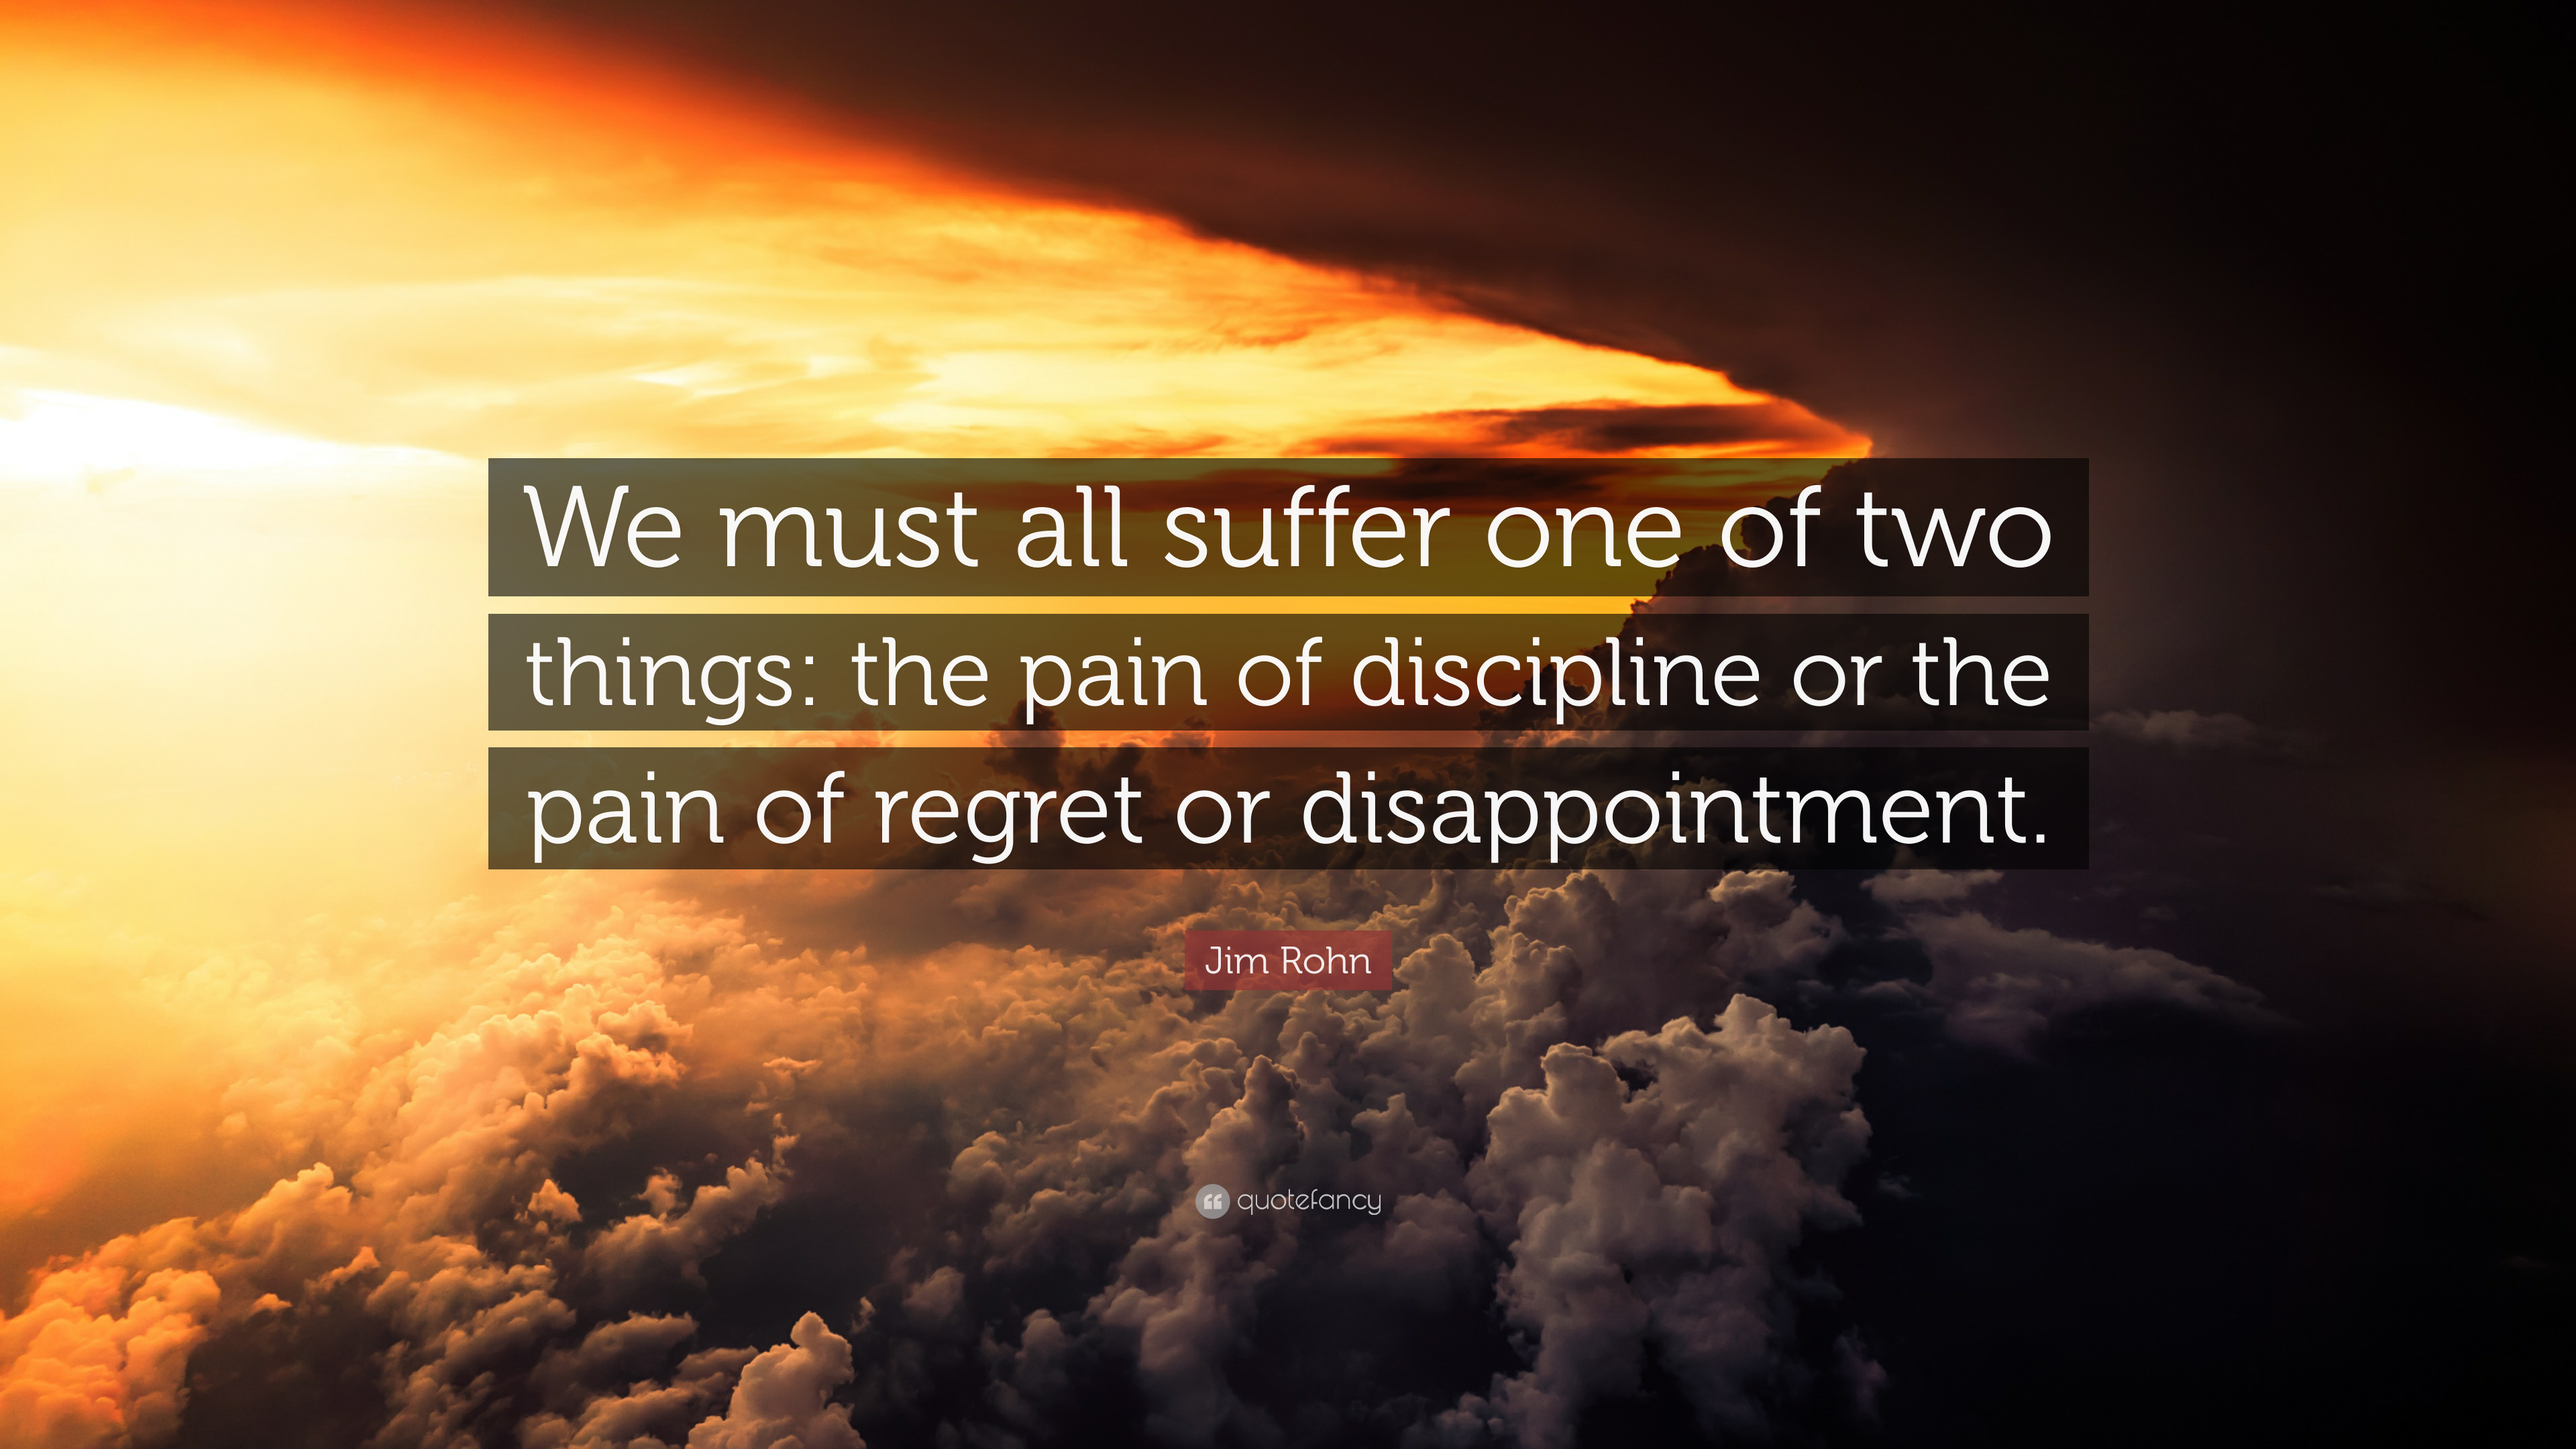 Jim Rohn Quote: “We must all suffer one of two things: the pain of ...